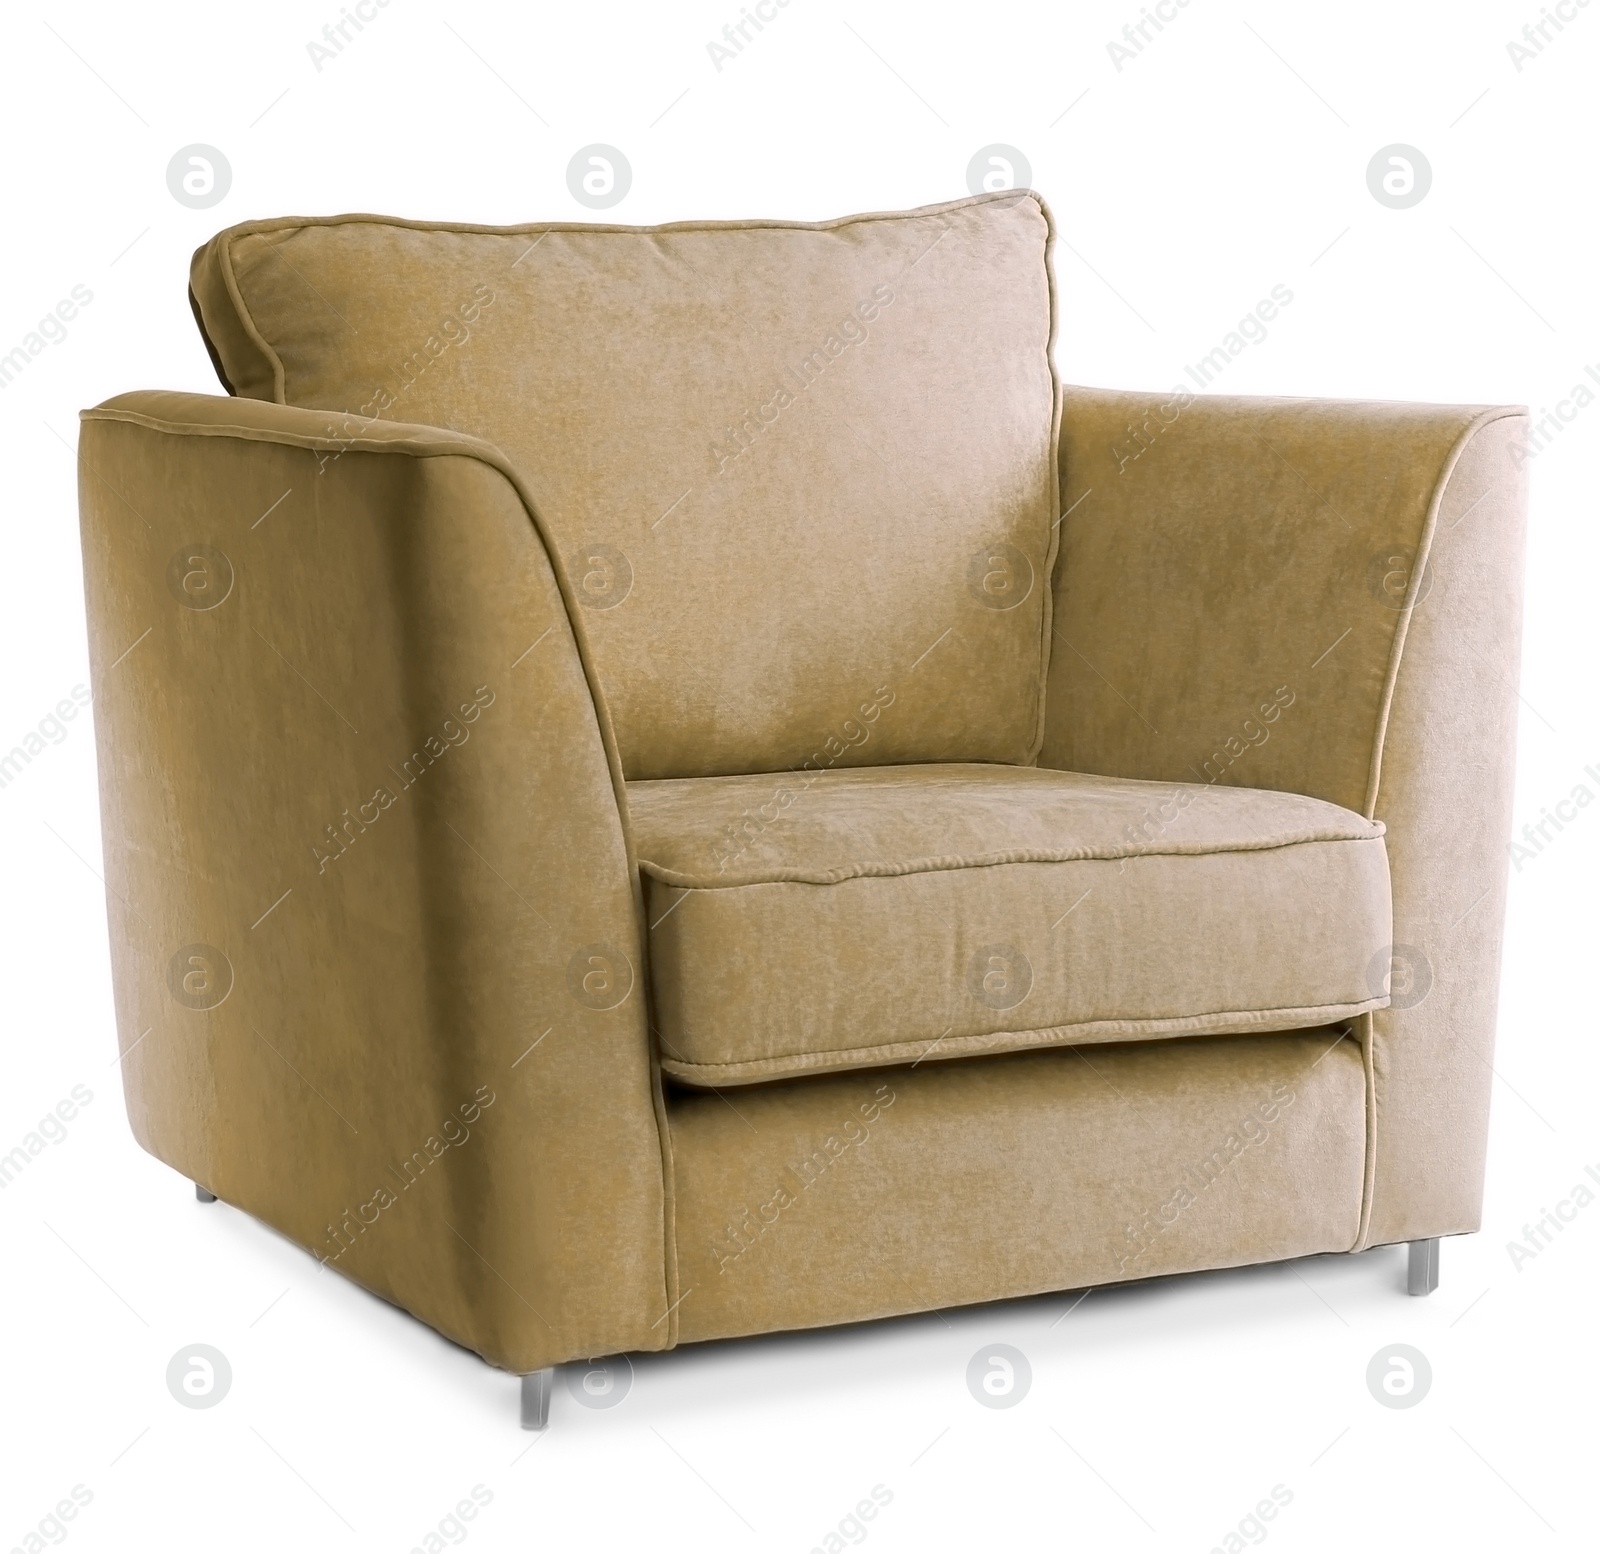 Image of One comfortable dark beige armchair isolated on white